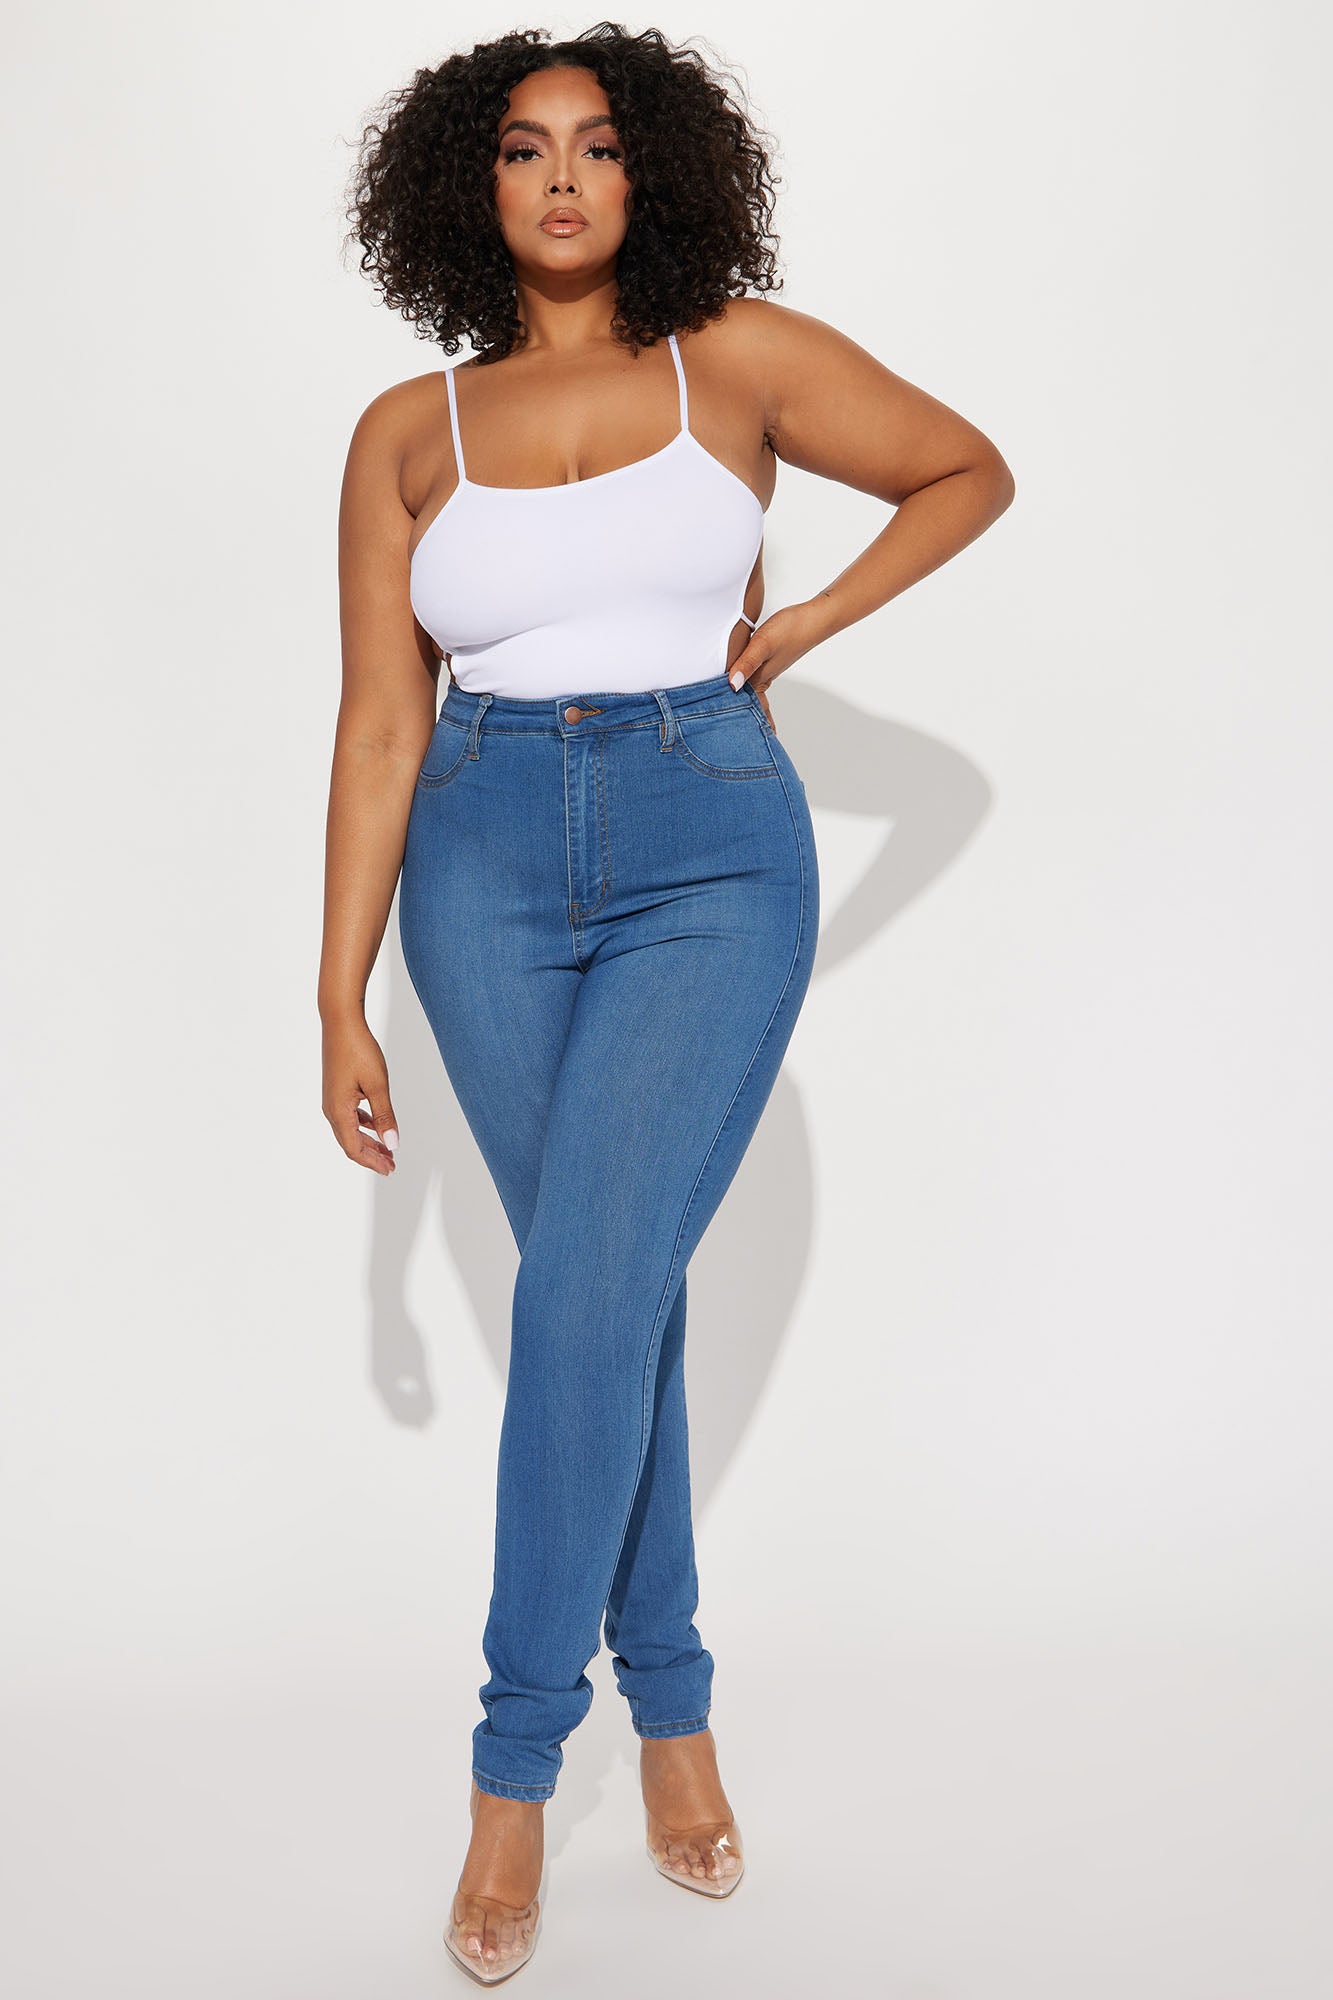 PLUS SIZE FASHION NOVA CURVE JEANS/PANTS TRY ON HAUL | UNDER $30 | IT'S  GIVING SNATCHED! - YouTube